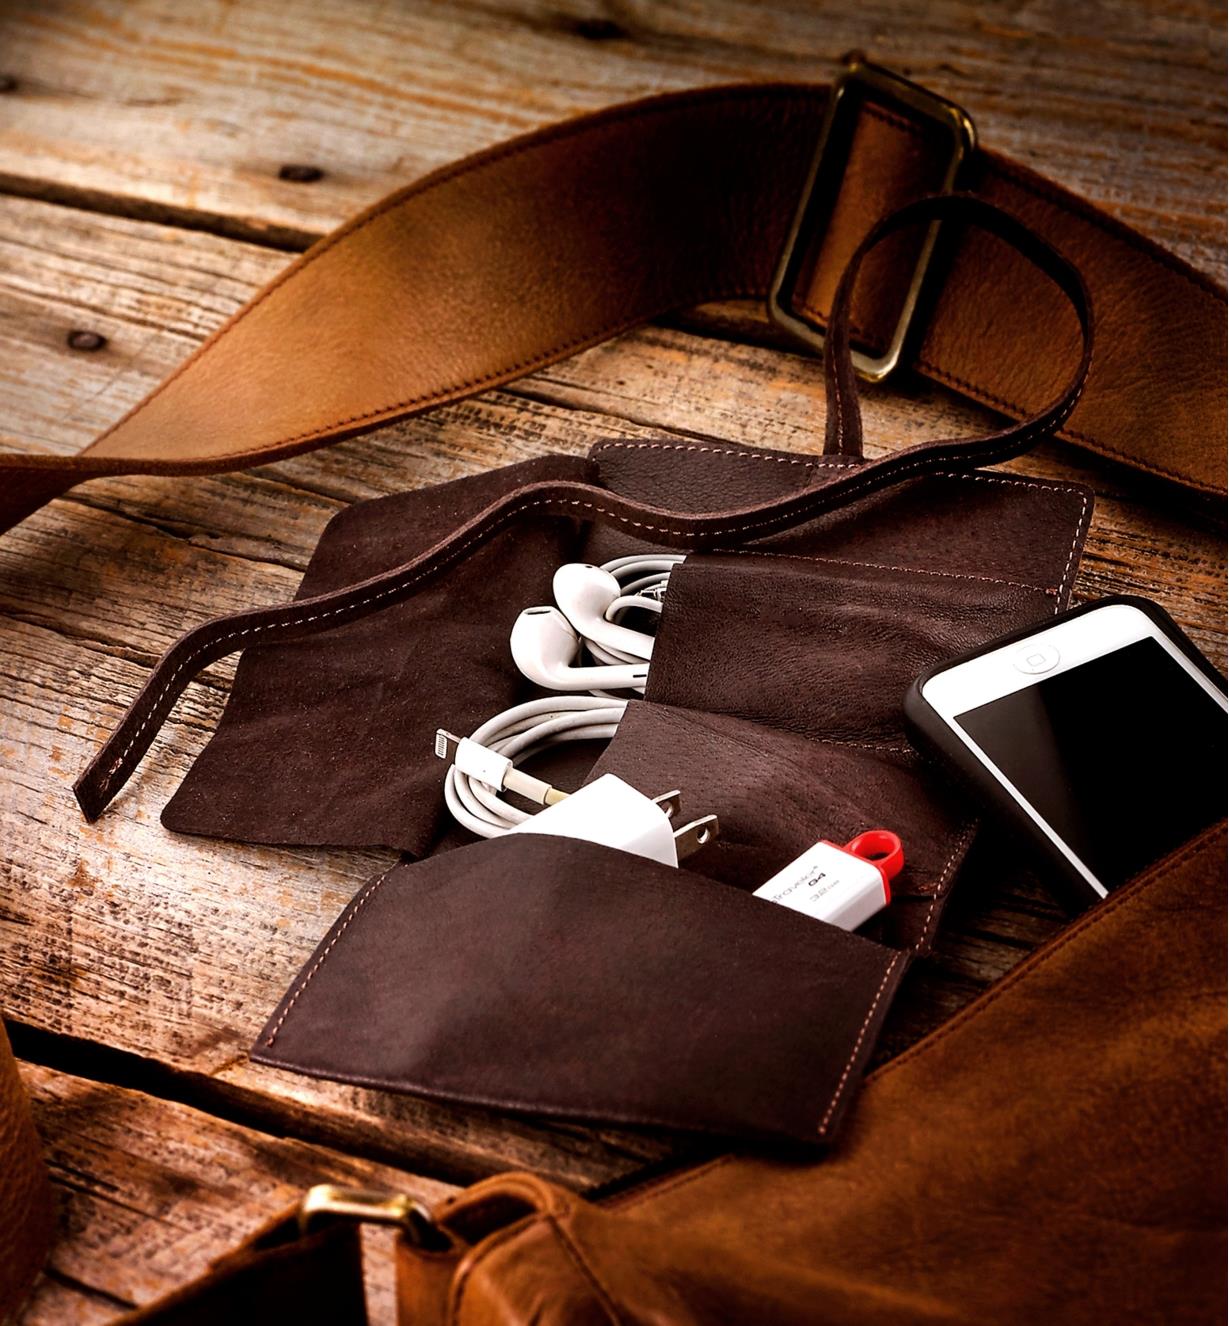 A cord wallet beside a smartphone and purse, holding a charge cable, ear buds and a flash drive